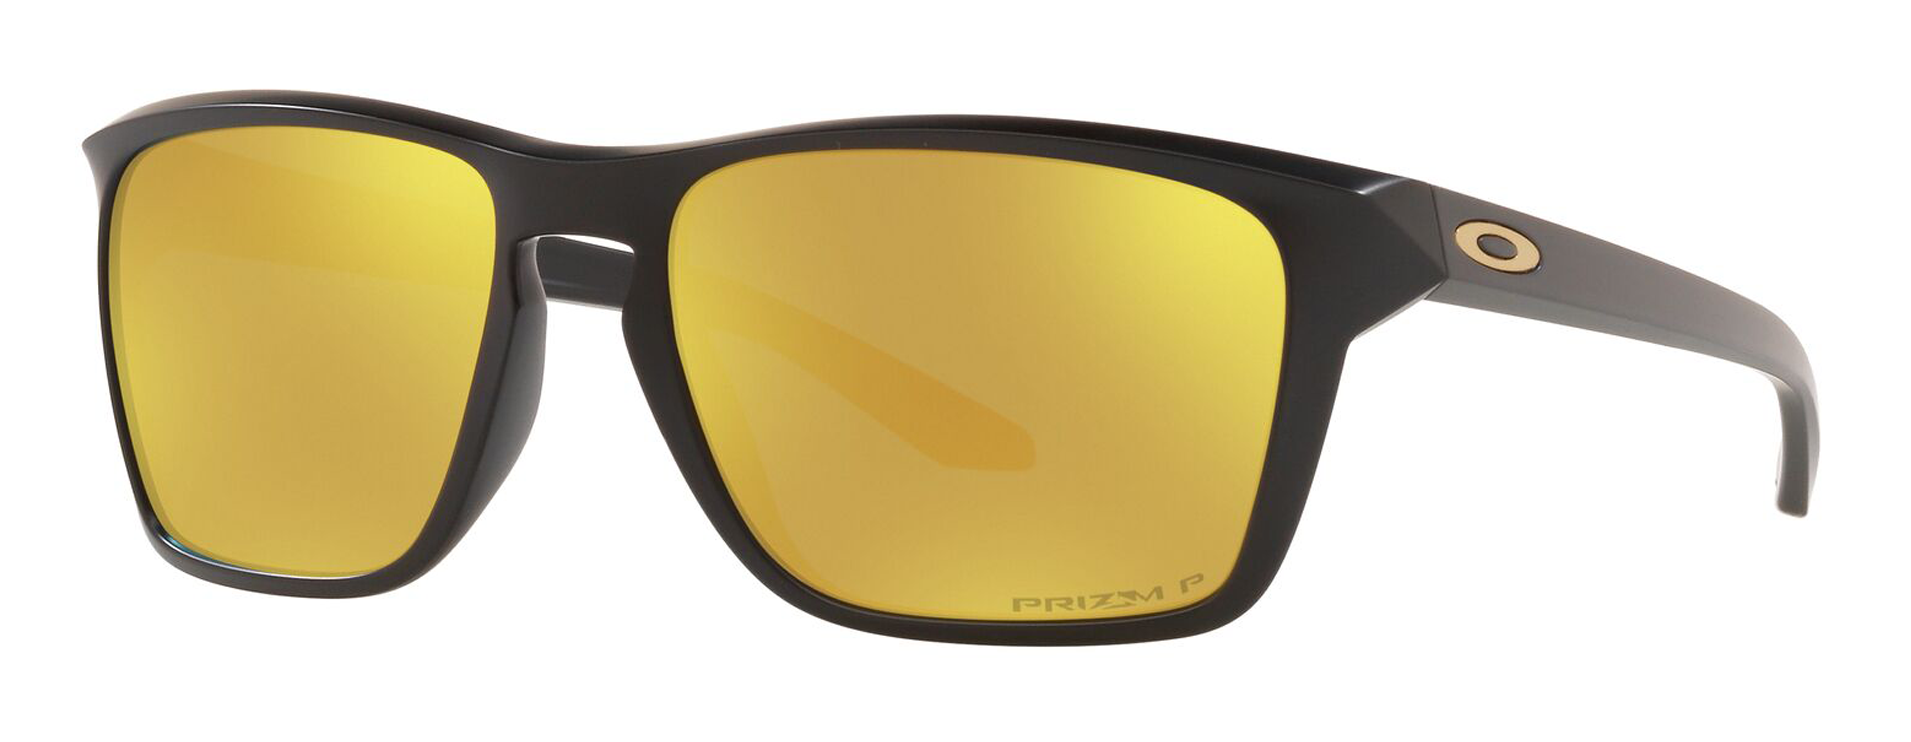 oakley sylas sunglasses in matte black with prizm 24k yellow gold polarized lenses